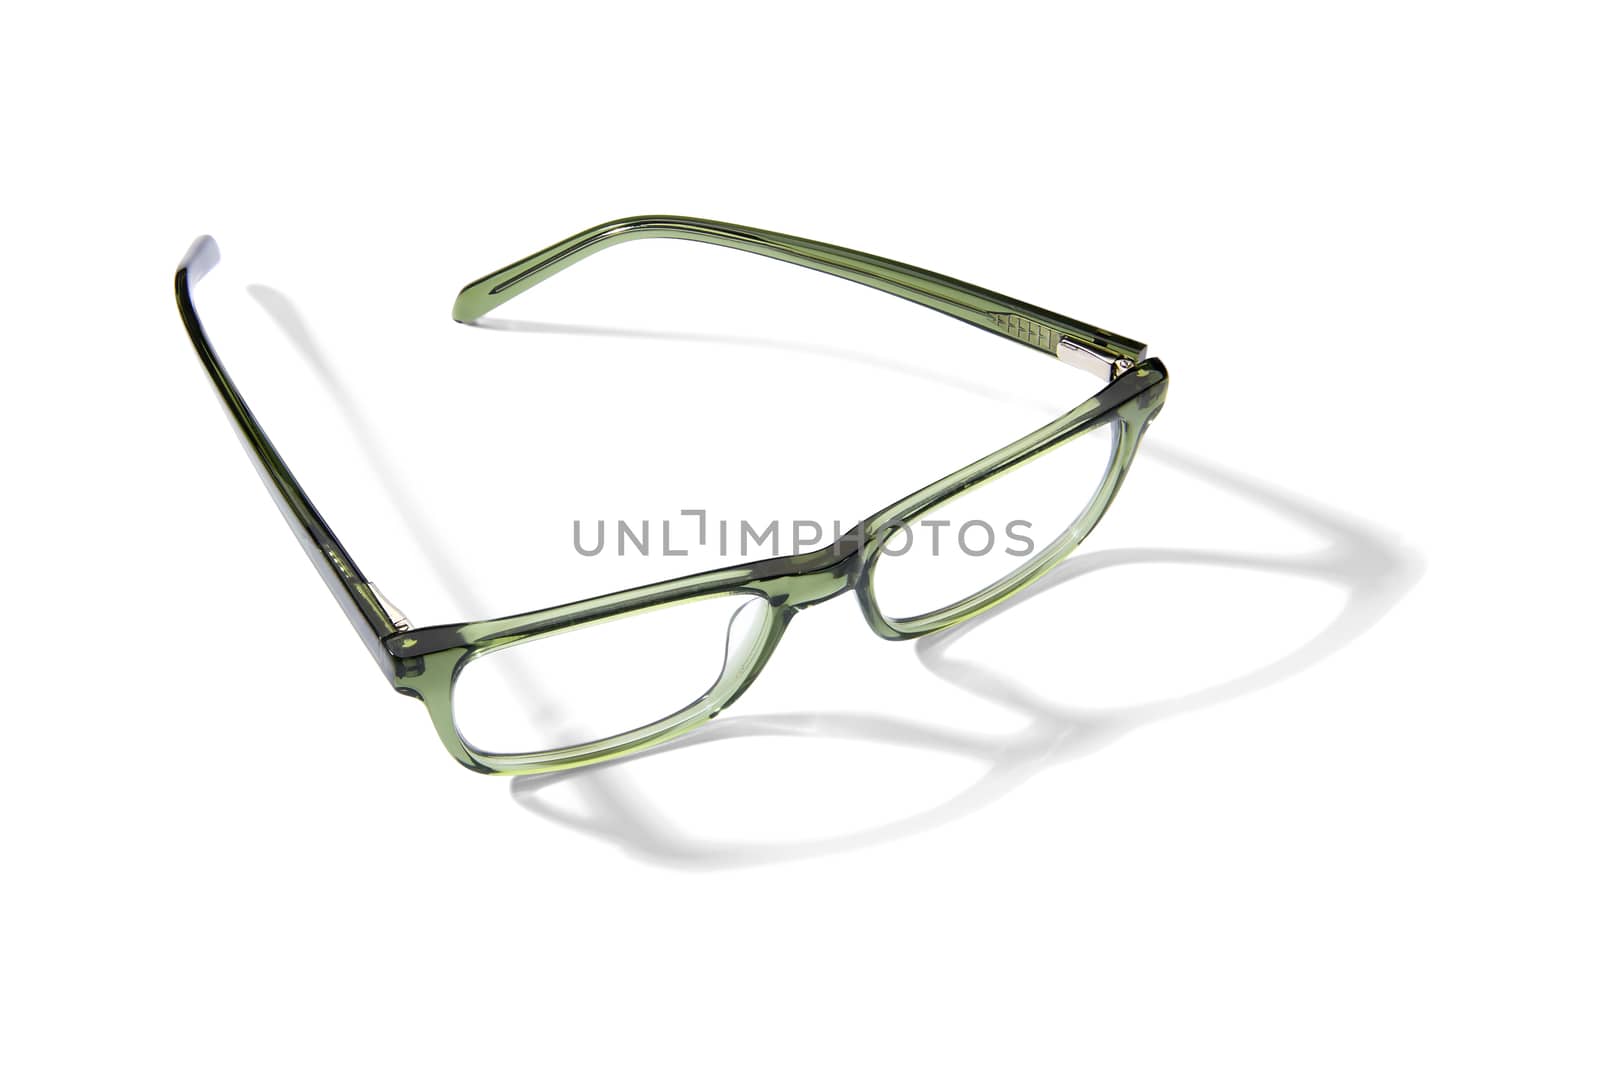 Studio shot of pair of green eyeglasses on white background with shadow.